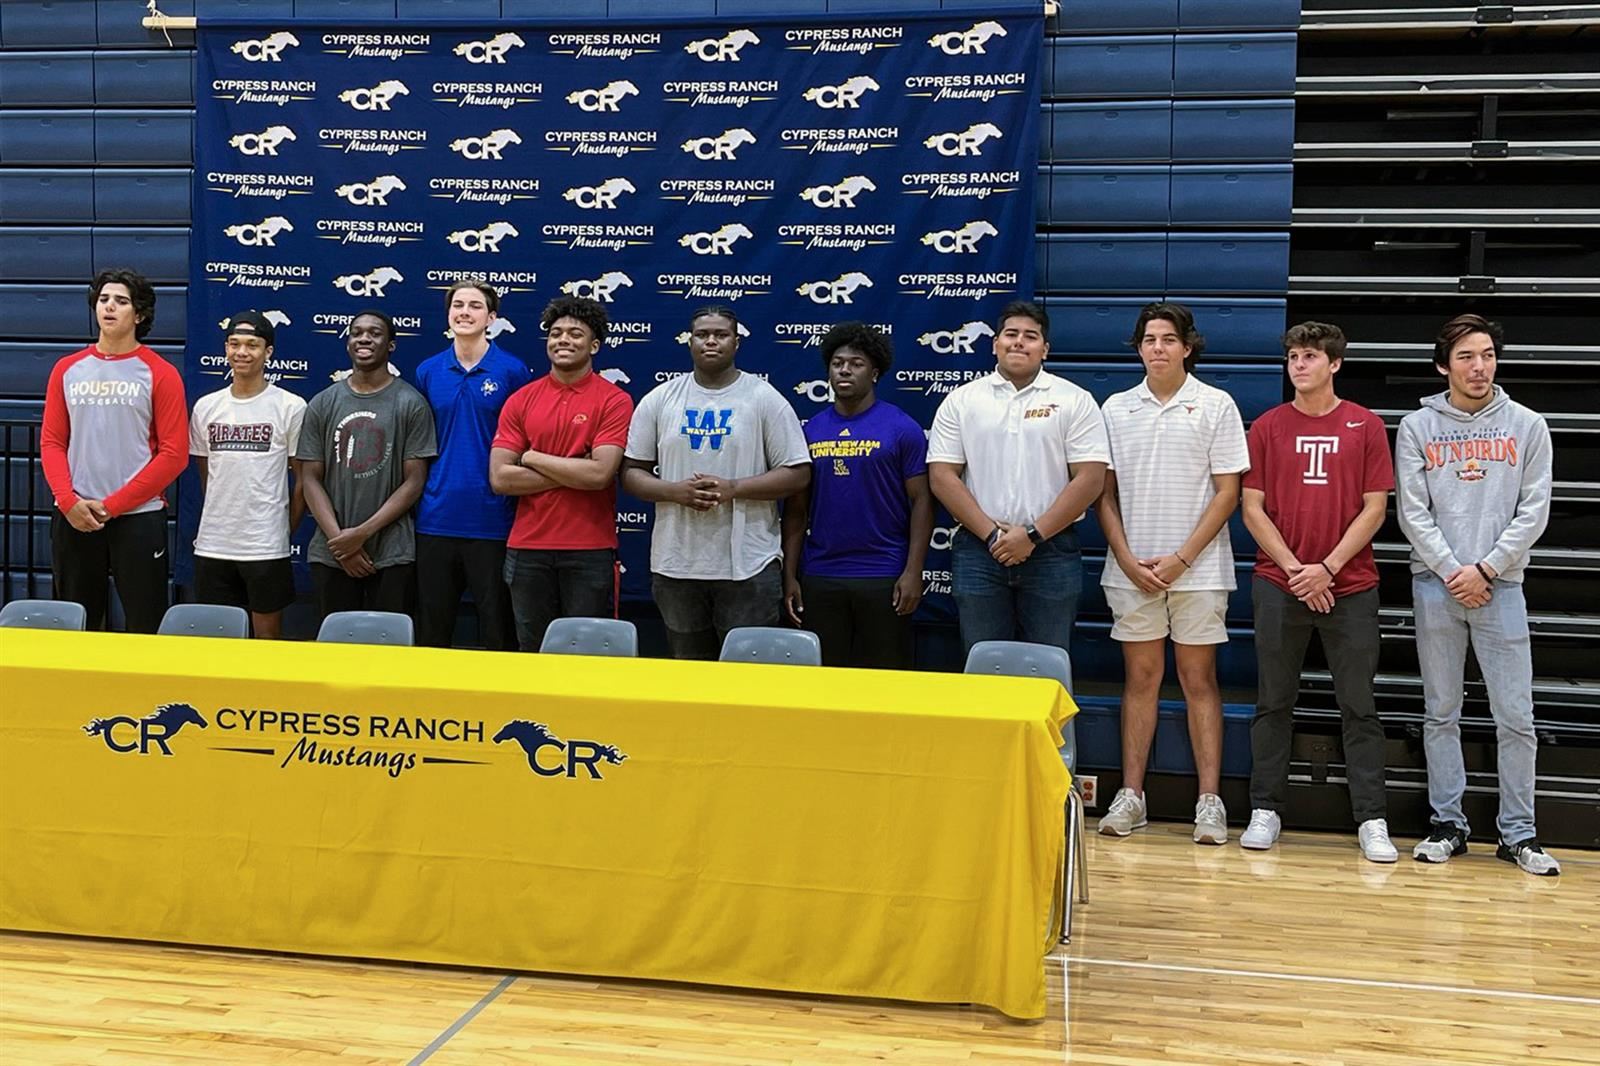 Eleven Cypress Ranch High School seniors were among more than 60 student-athletes across CFISD to sign letters of intent.